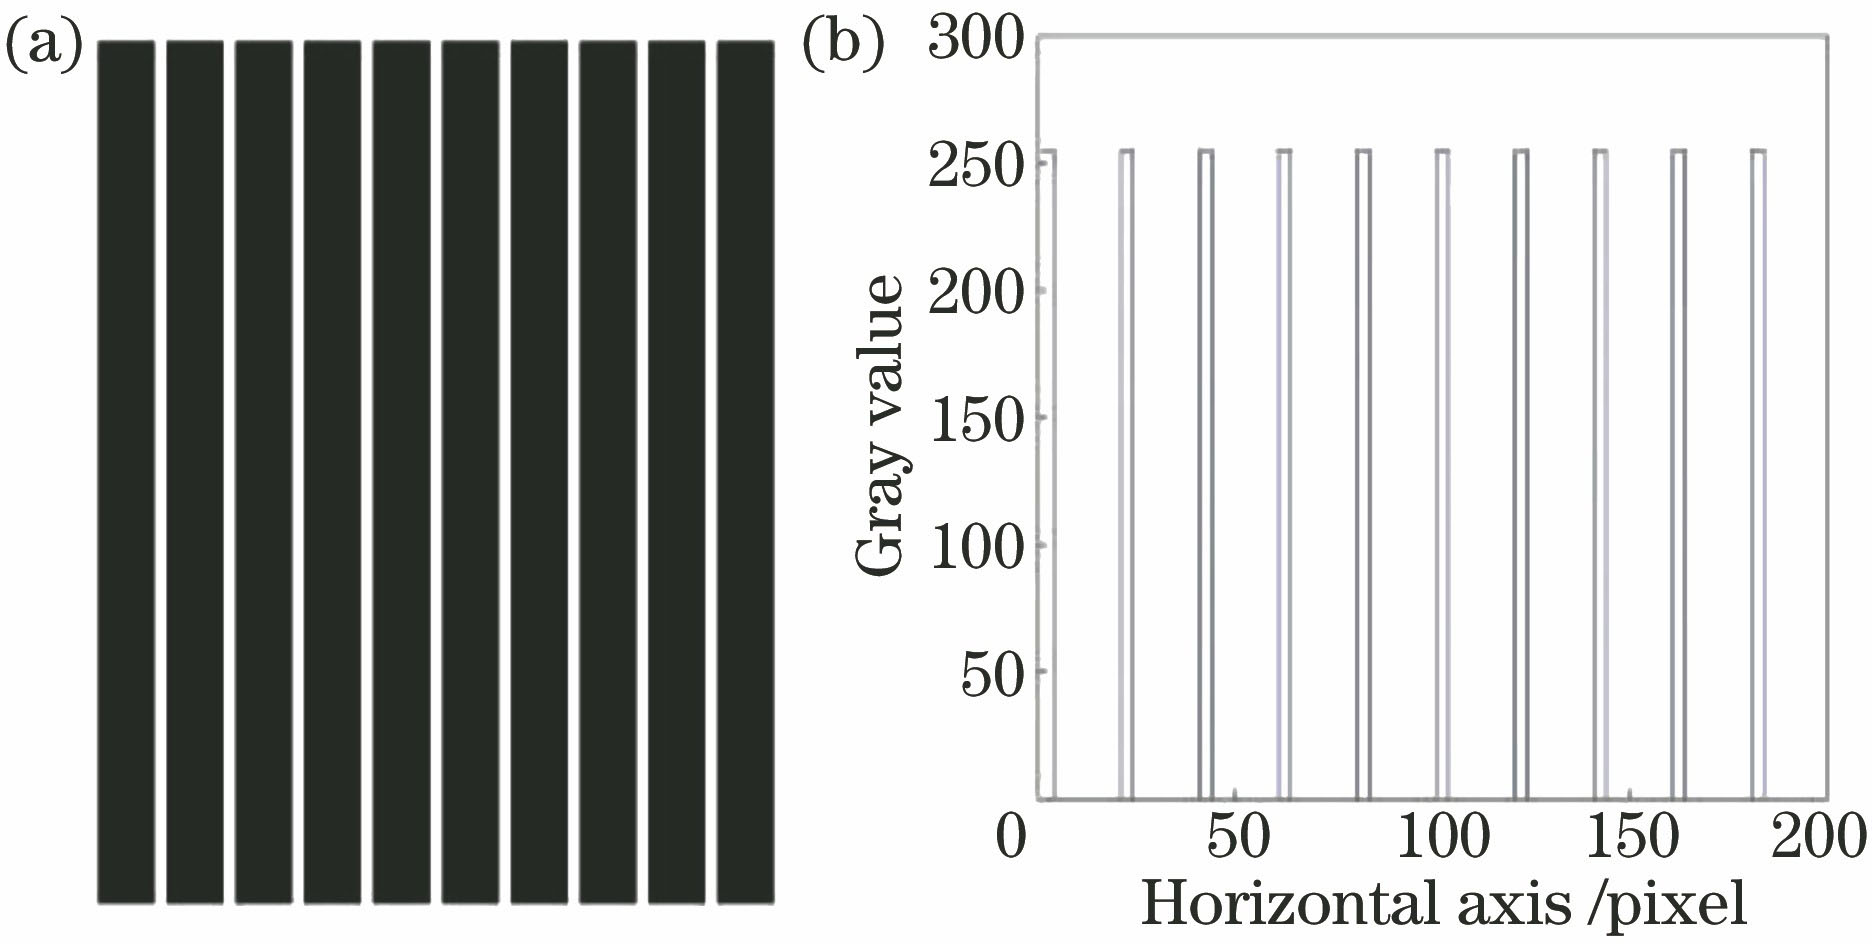 Binary grating and grayscale distribution. (a) Binary grating; (b) grayscale distribution profile